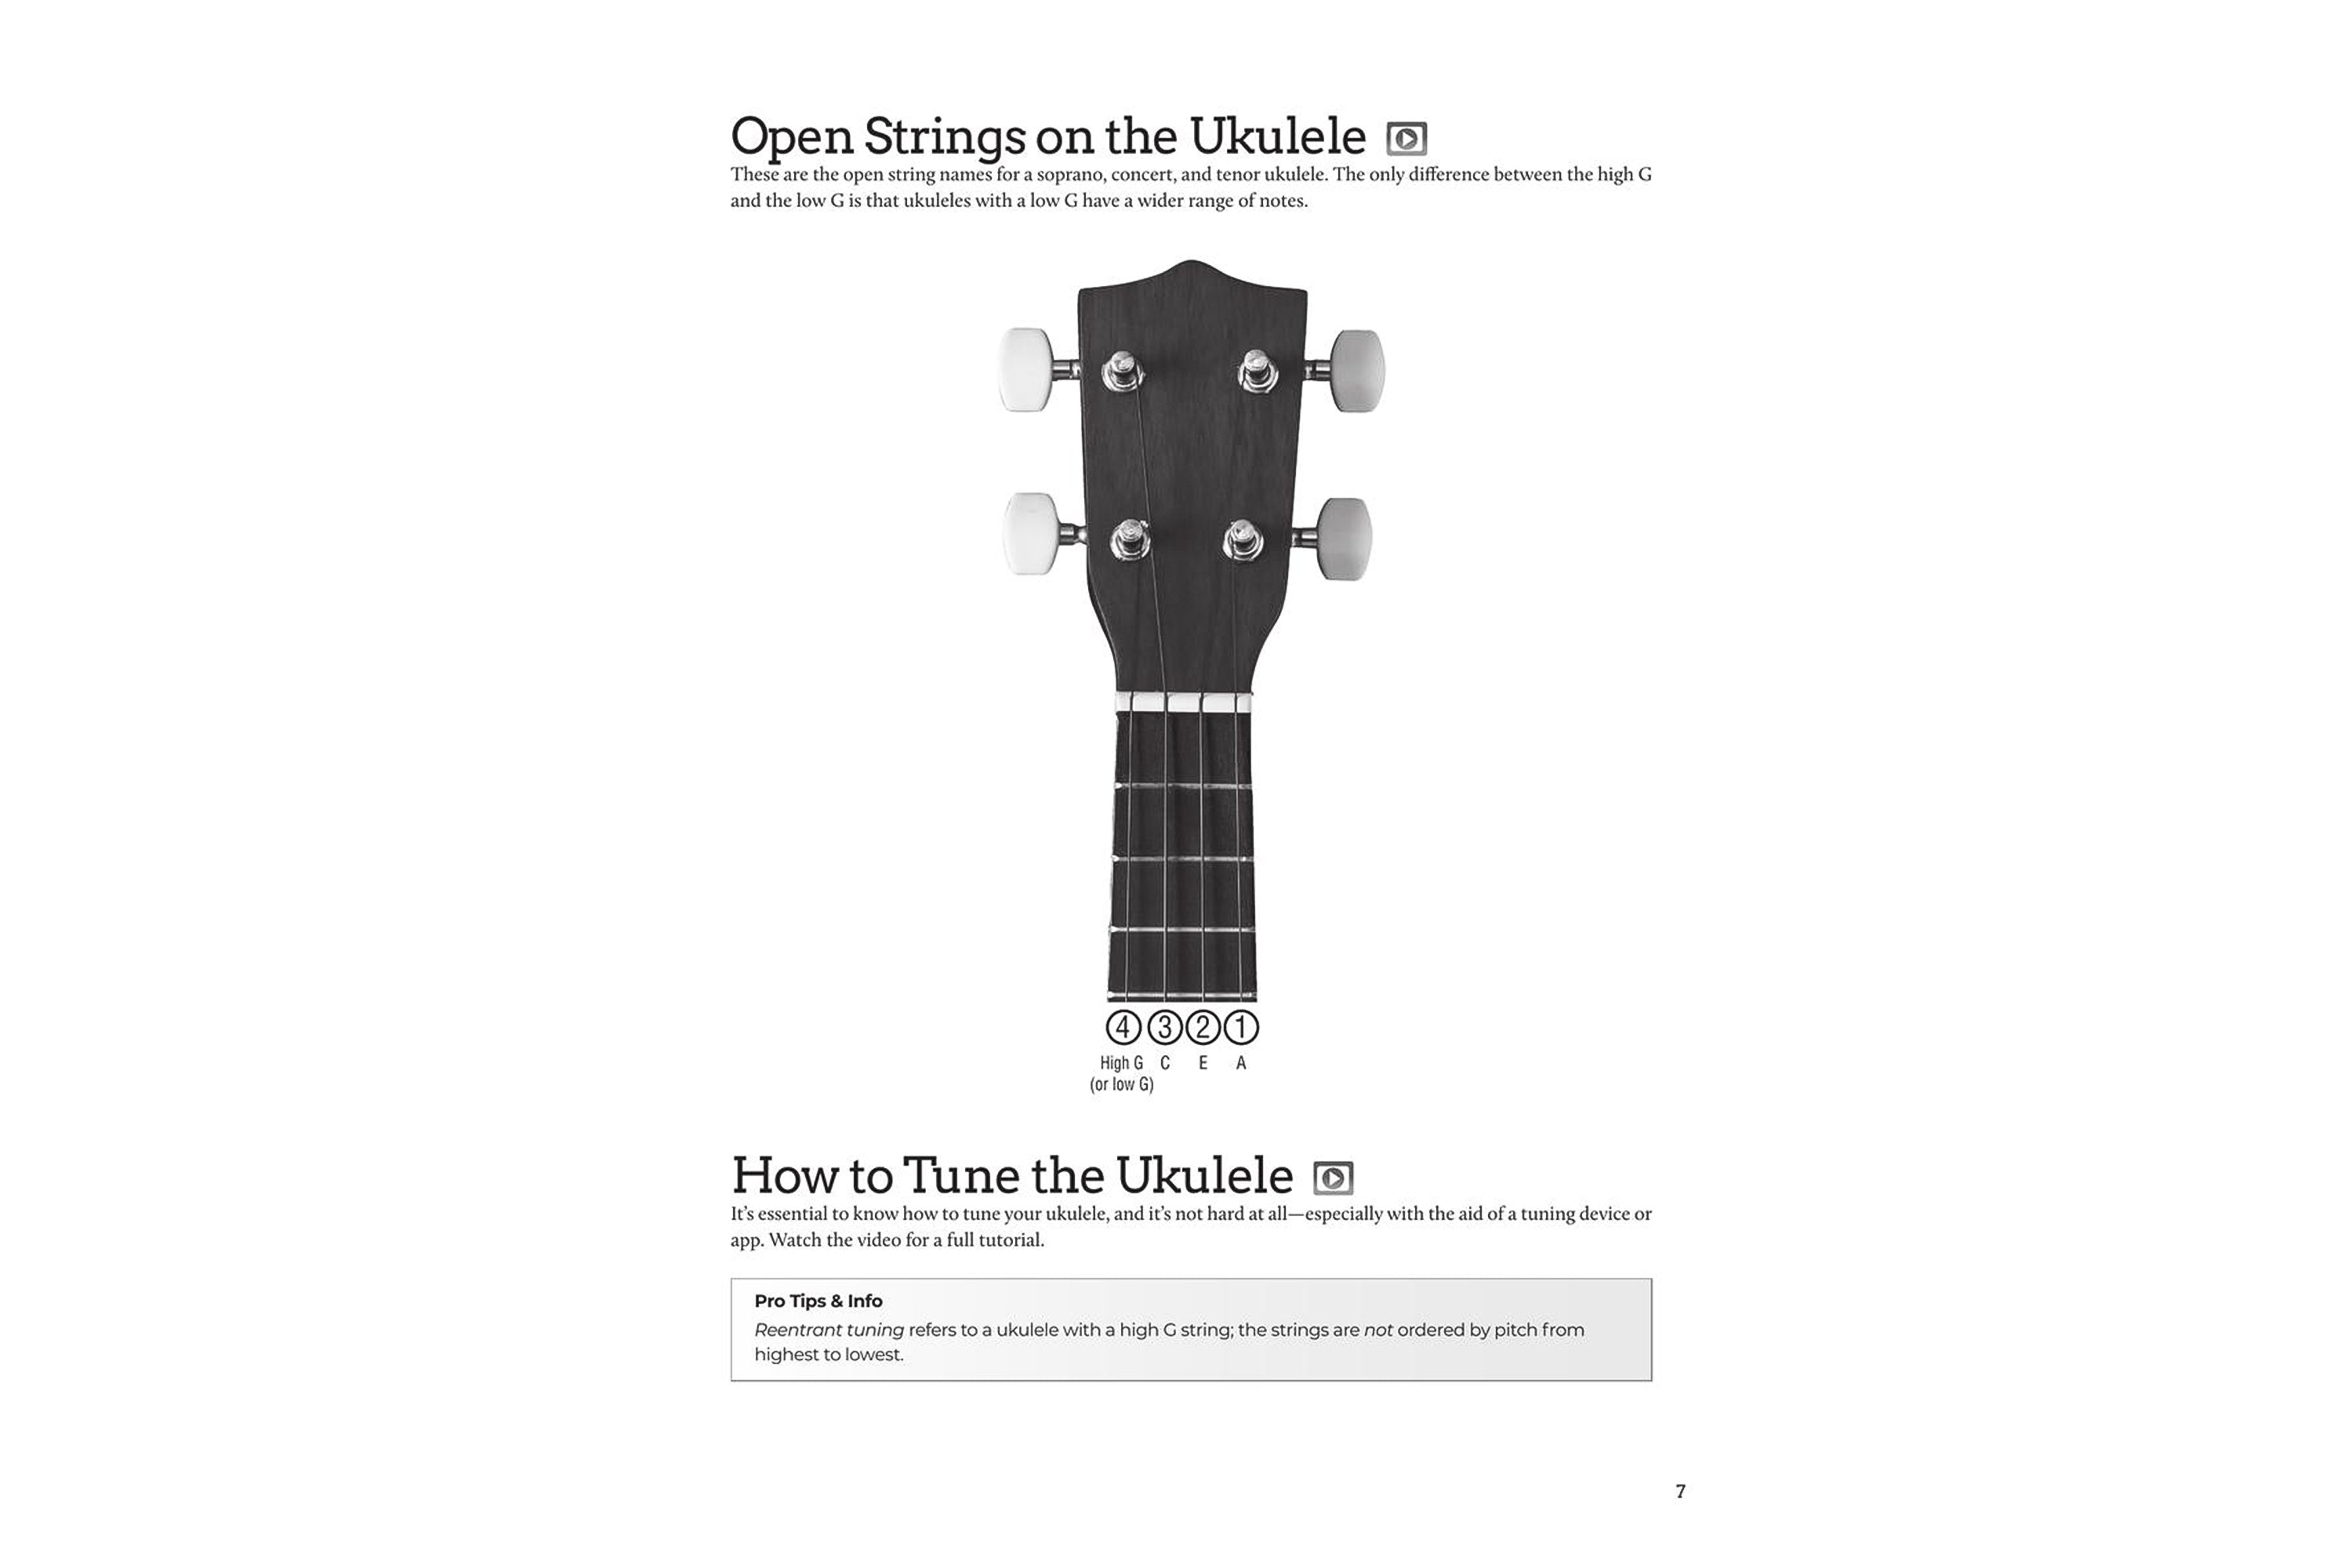 DO-IT-YOURSELF UKULELE The Best Step-by-Step Guide to Start Playing  for Soprano, Concert, or Tenor Ukulele